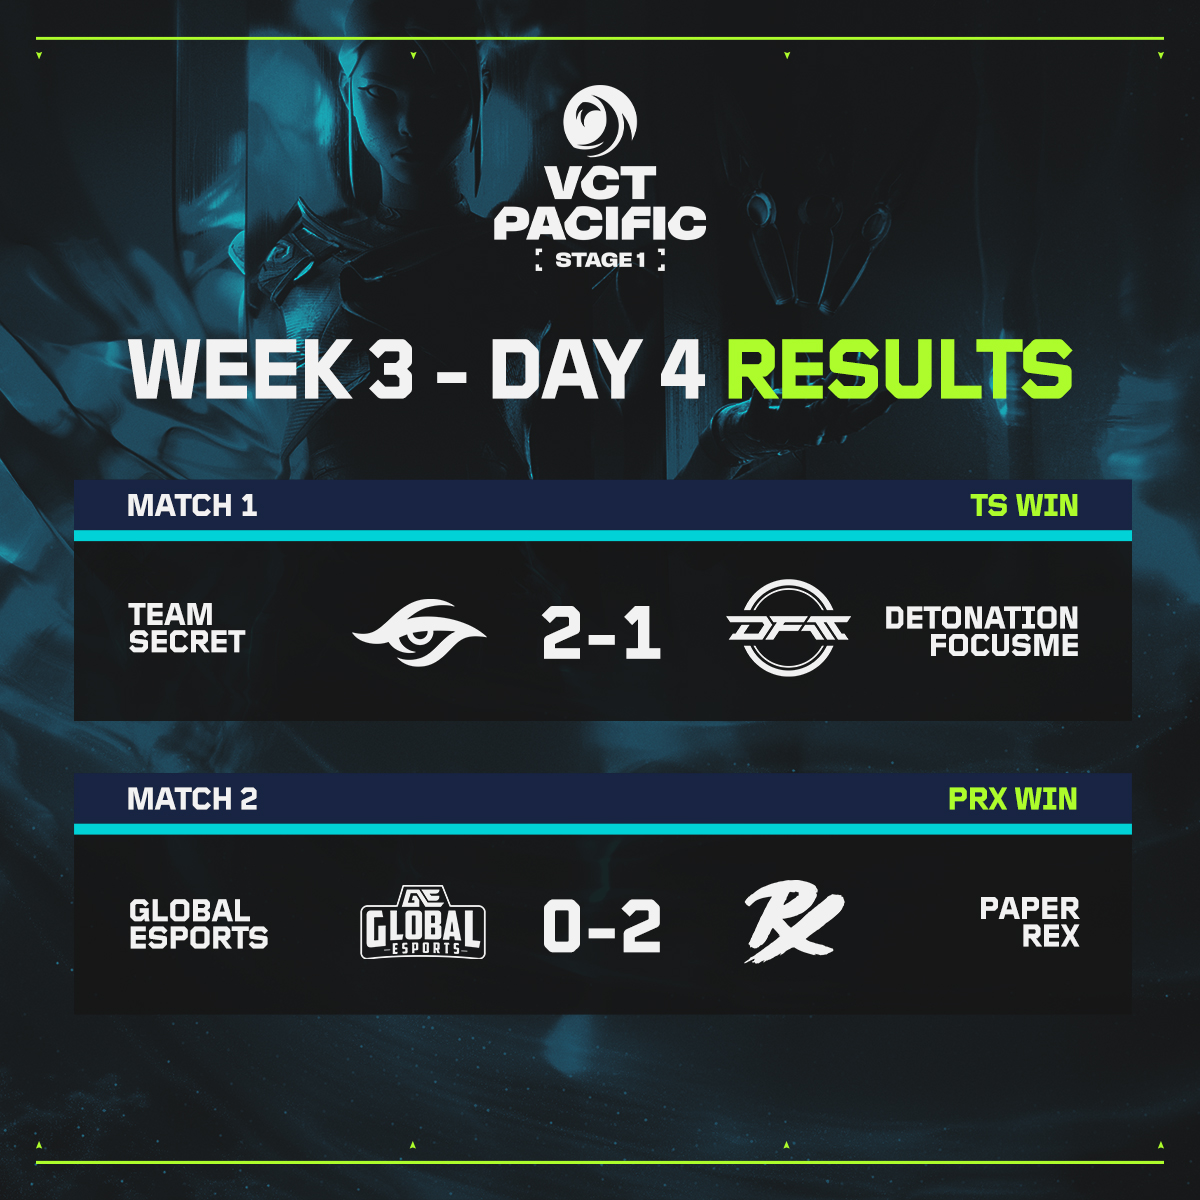 .@teamsecret and @pprxteam team bring home Ws to close out Week 3 of #VCTPacific